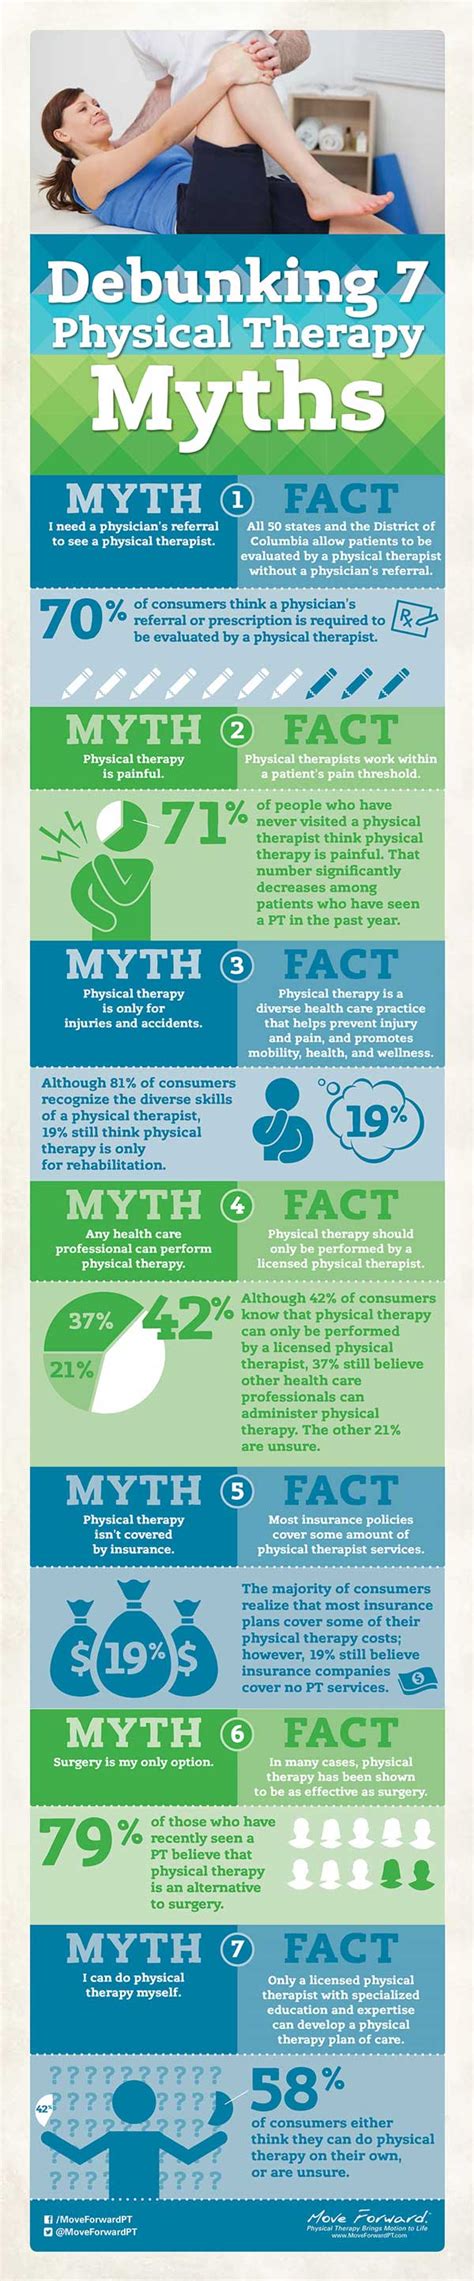 Infographic 7 Physical Therapy Myths Debunked